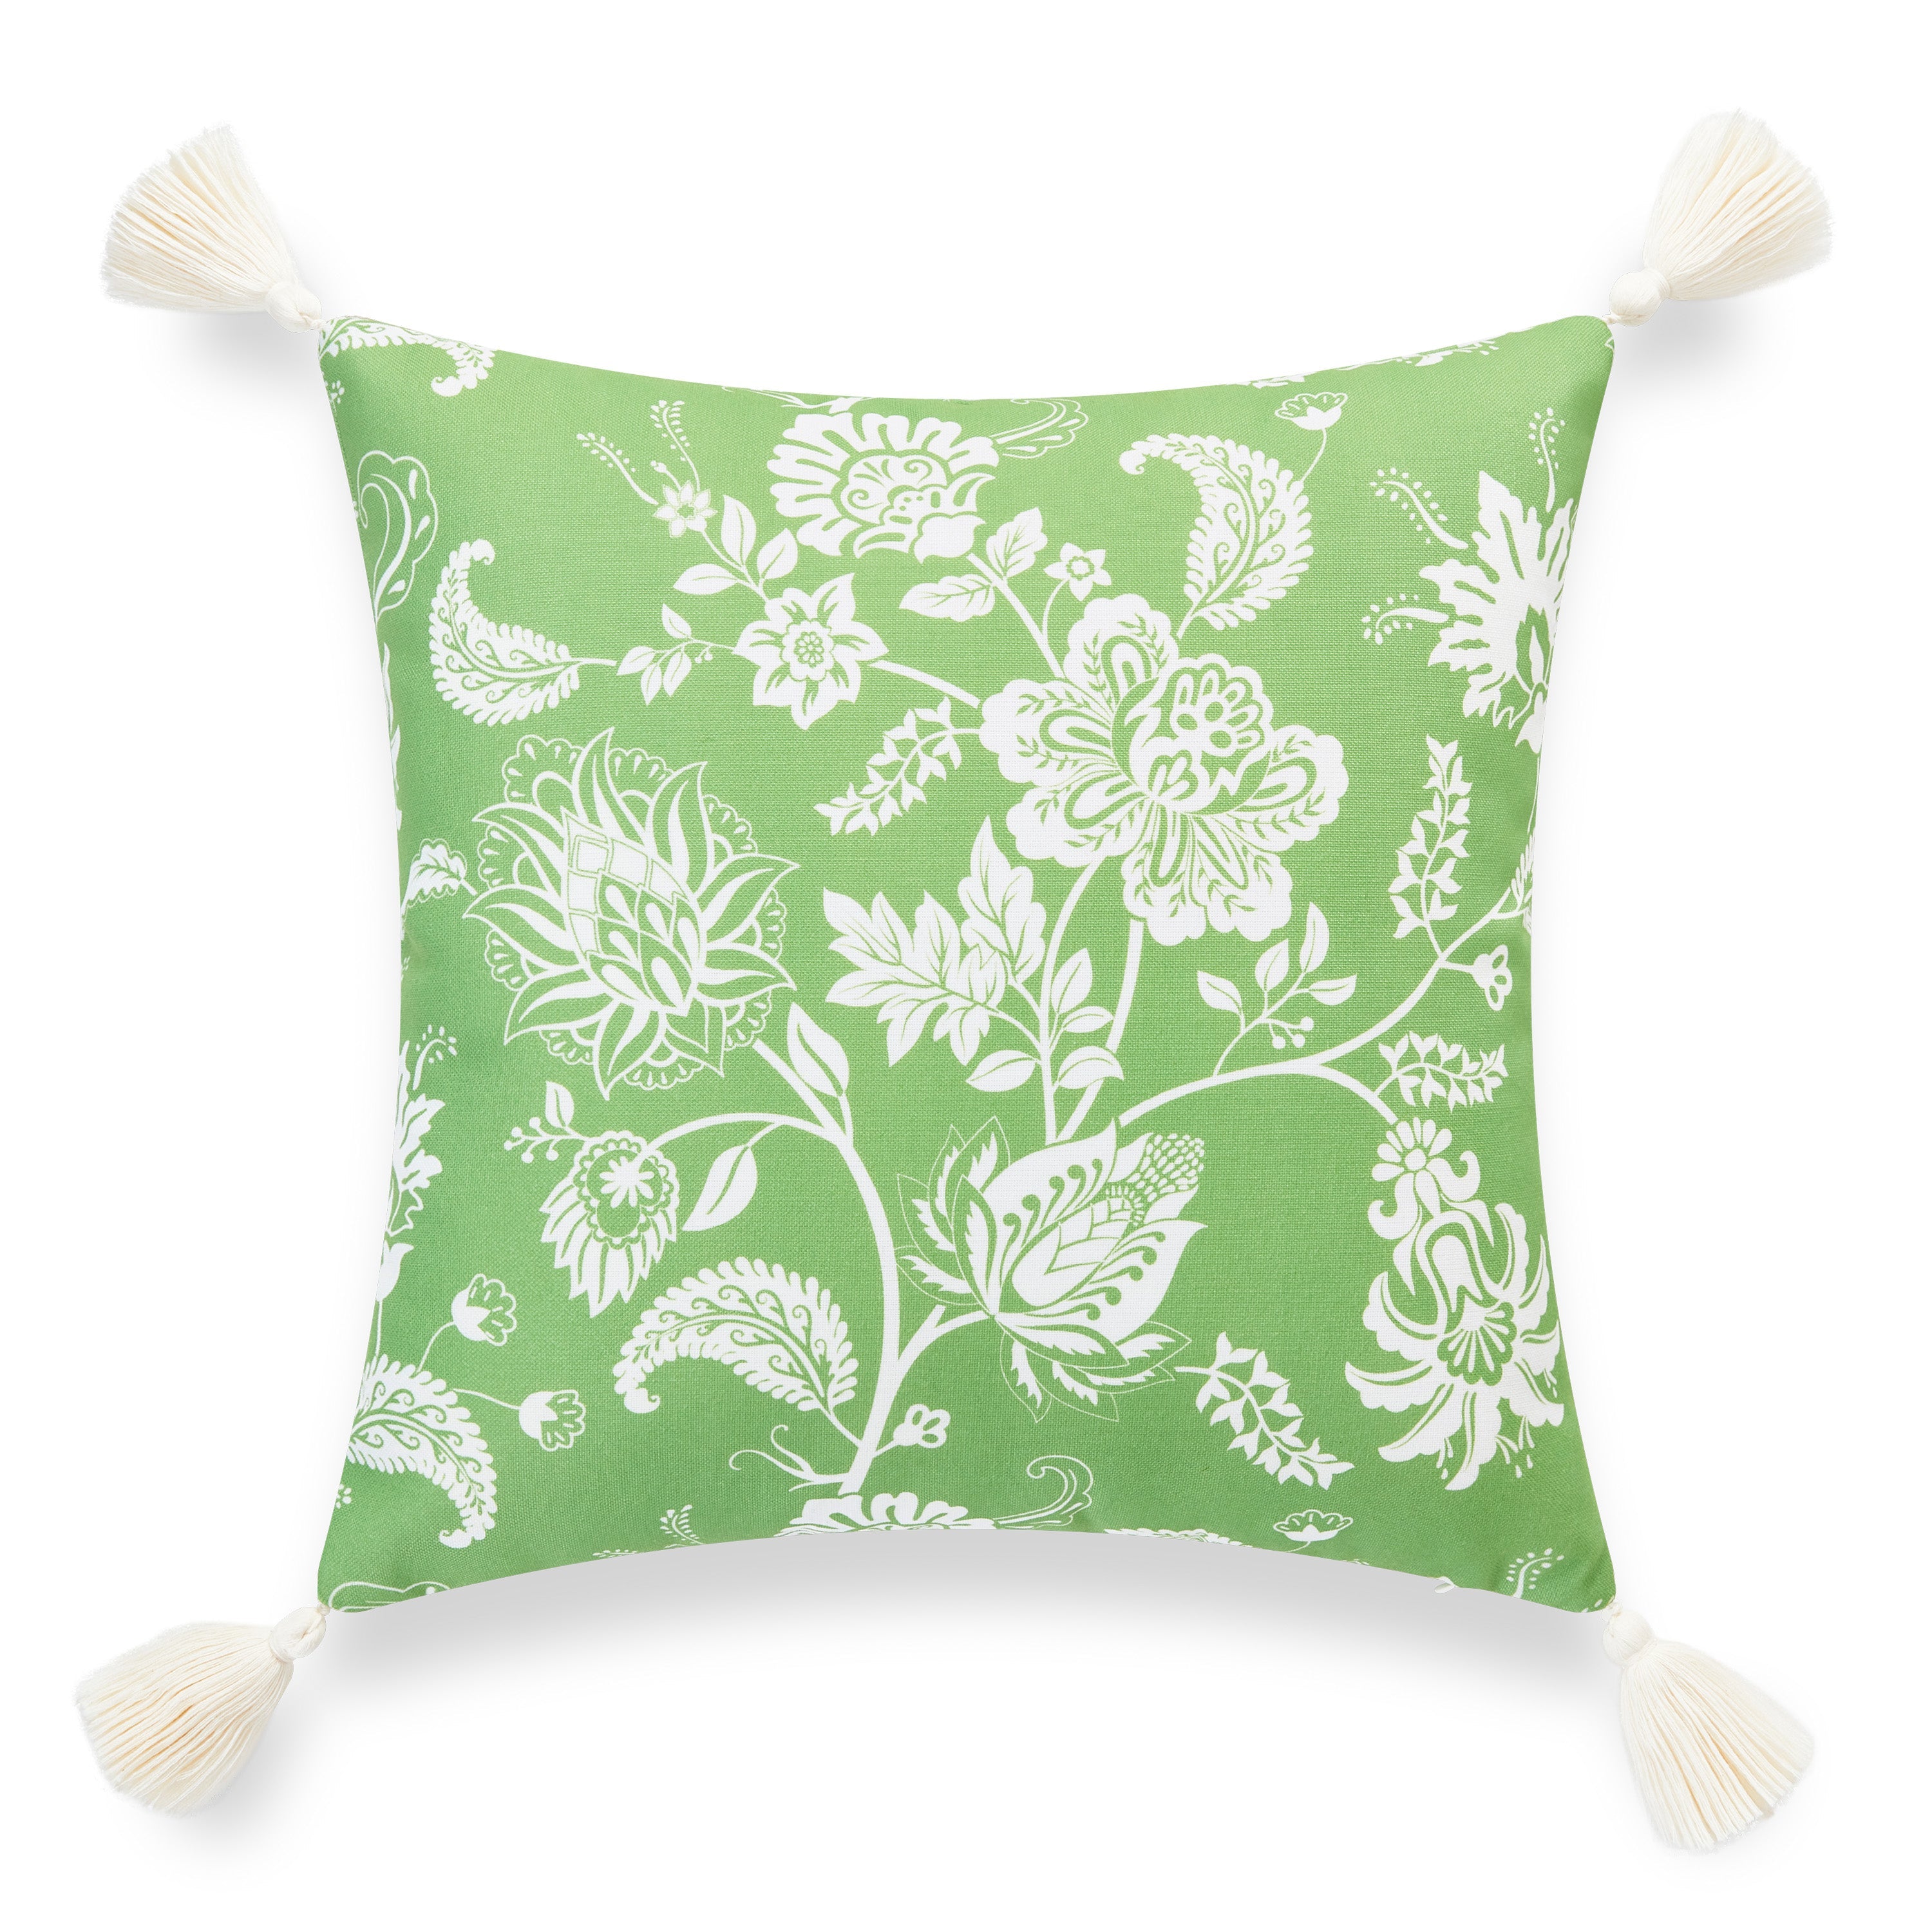 Coastal Indoor Outdoor Throw Pillow Cover, Floral Tassel, Pale Green, 18"x18"